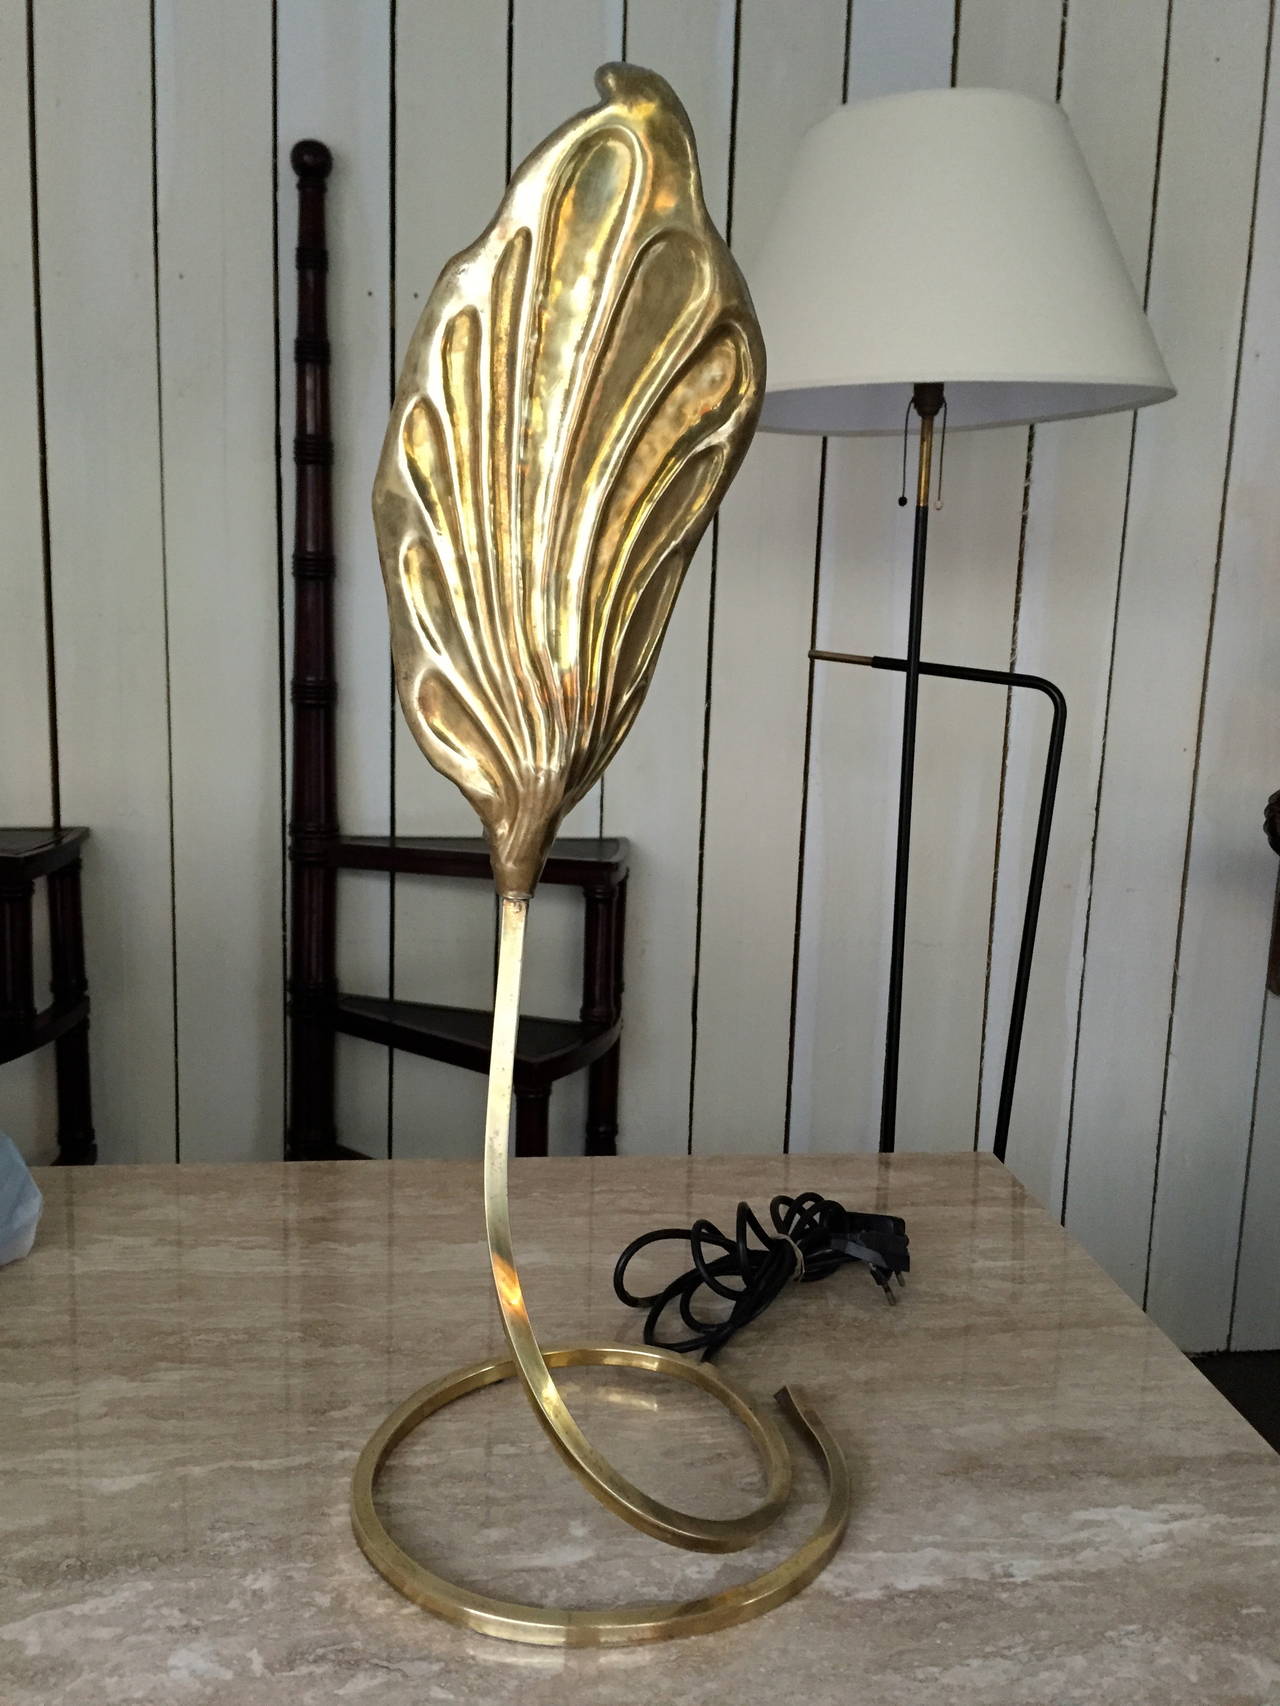 Table lamp by Tommaso Barbi, handmade, vegetable form in golden brass, Italy, circa 1970. Dimension: H 62 x 15 cm.